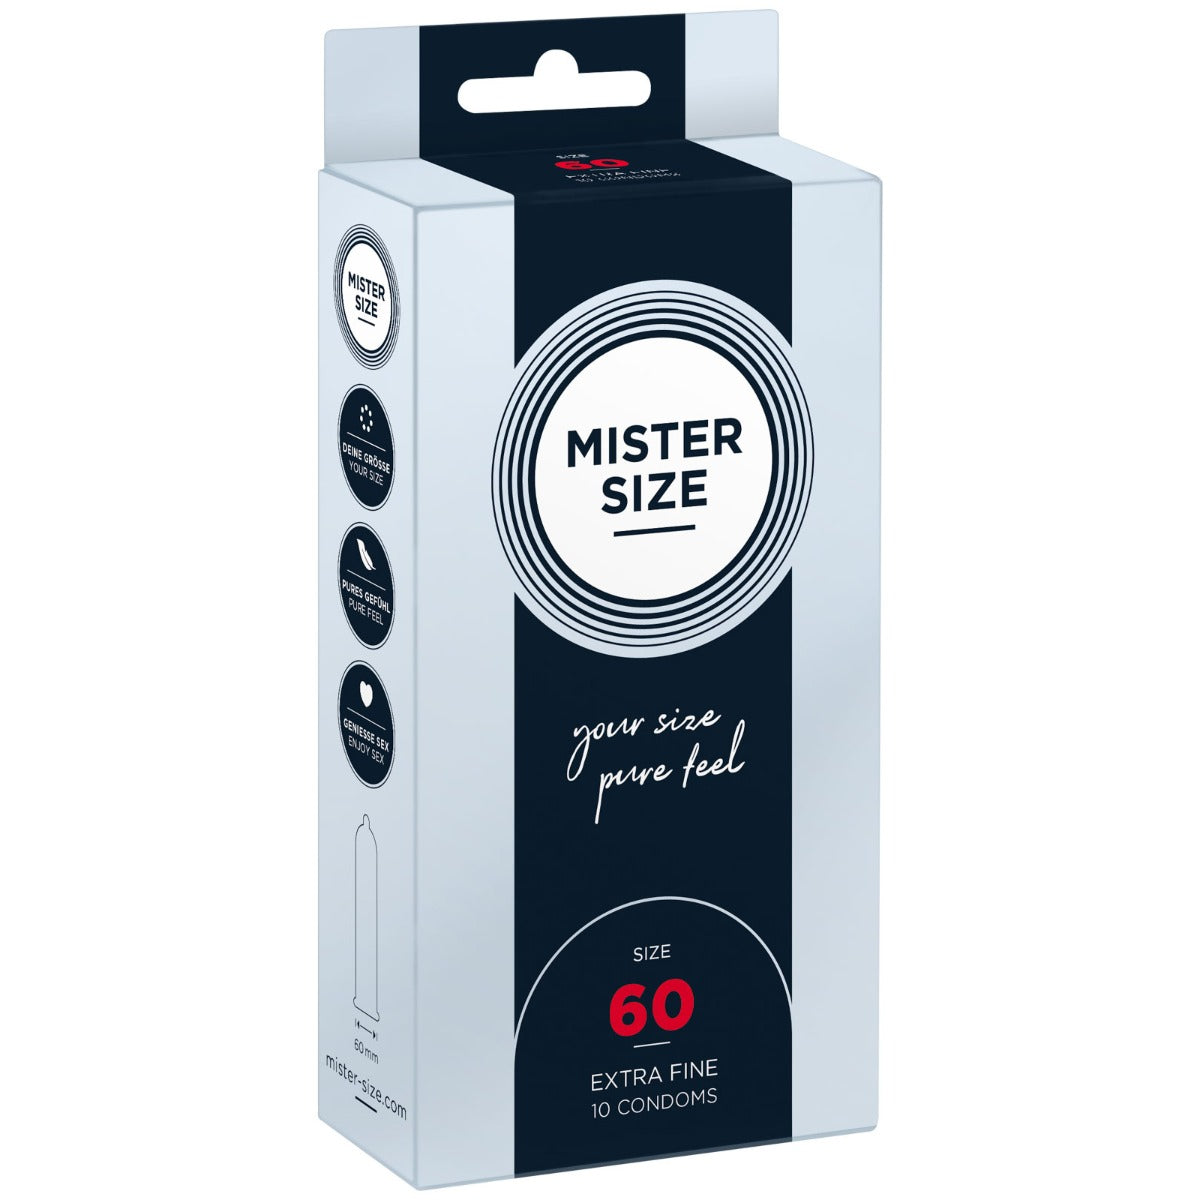 MISTER SIZE | Pure feel Condoms - Size 60 mm (10 pack)